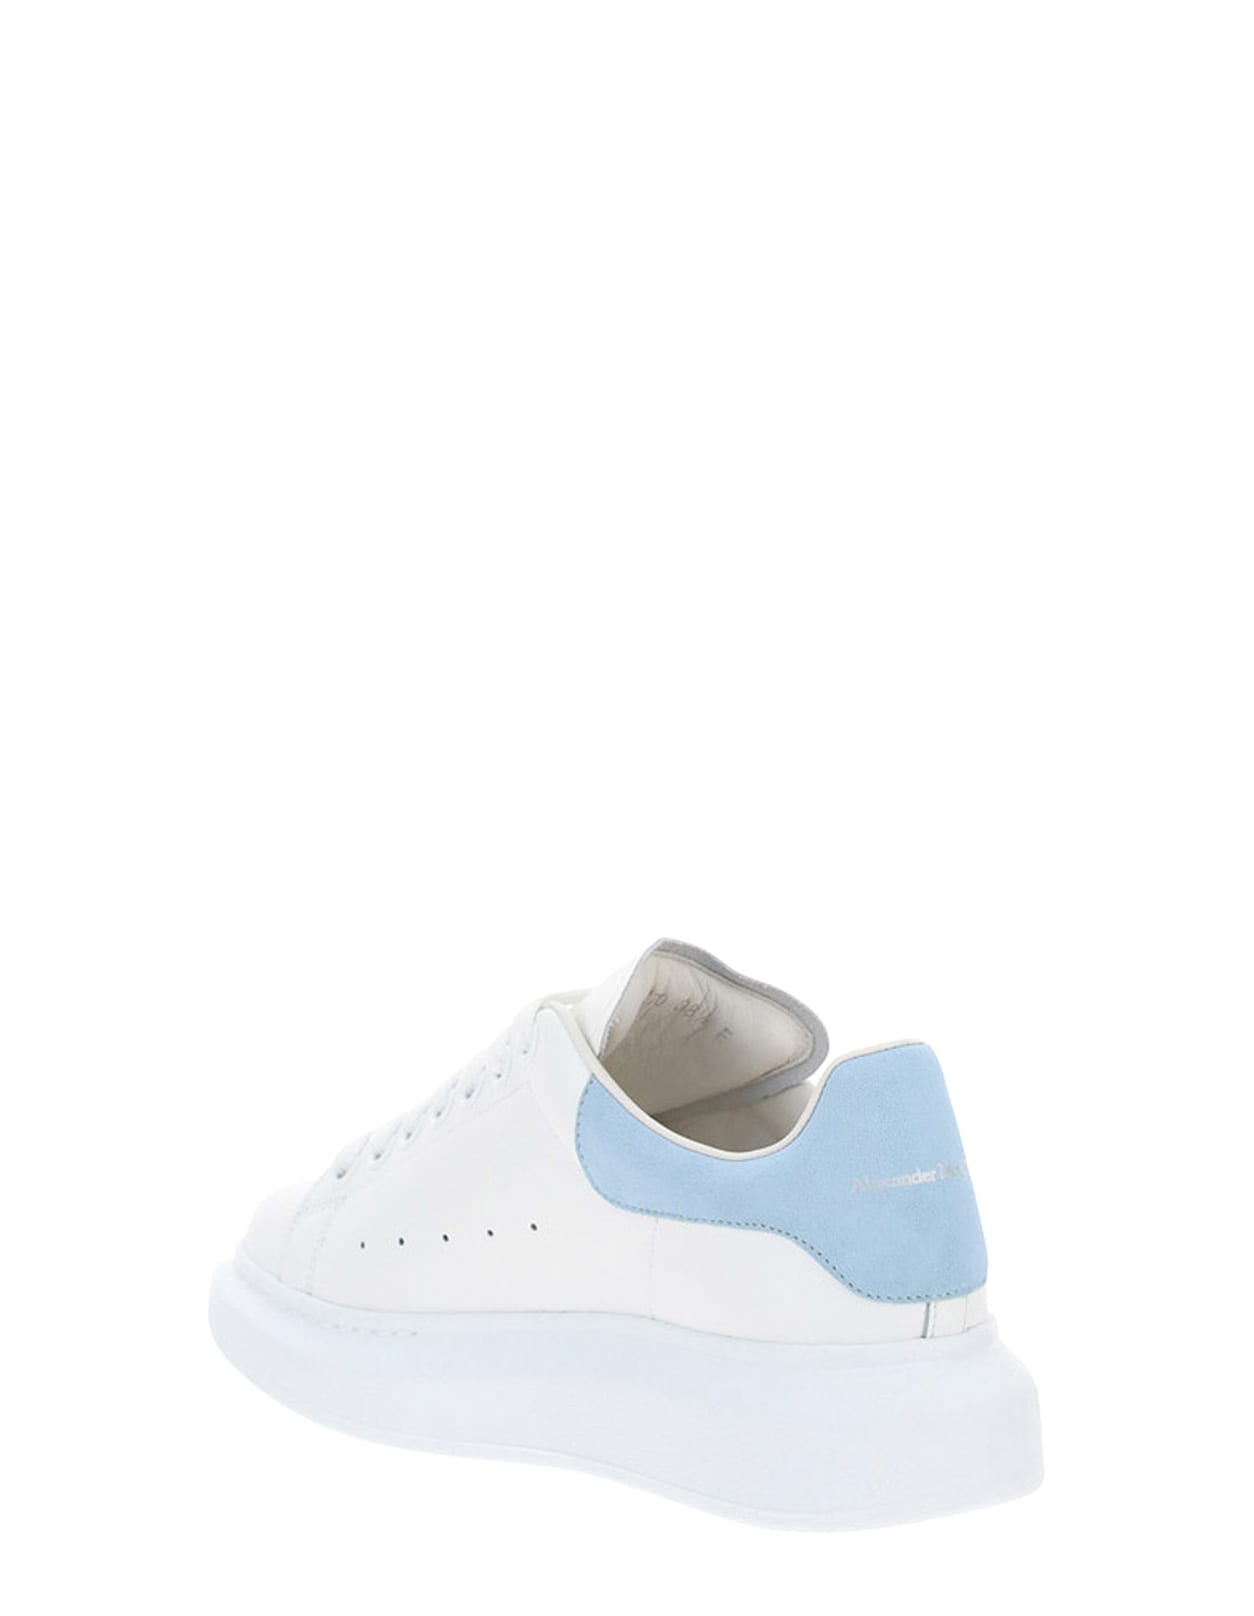 Shop Alexander Mcqueen White Oversized Sneakers With Powder Blue Suede Spoiler